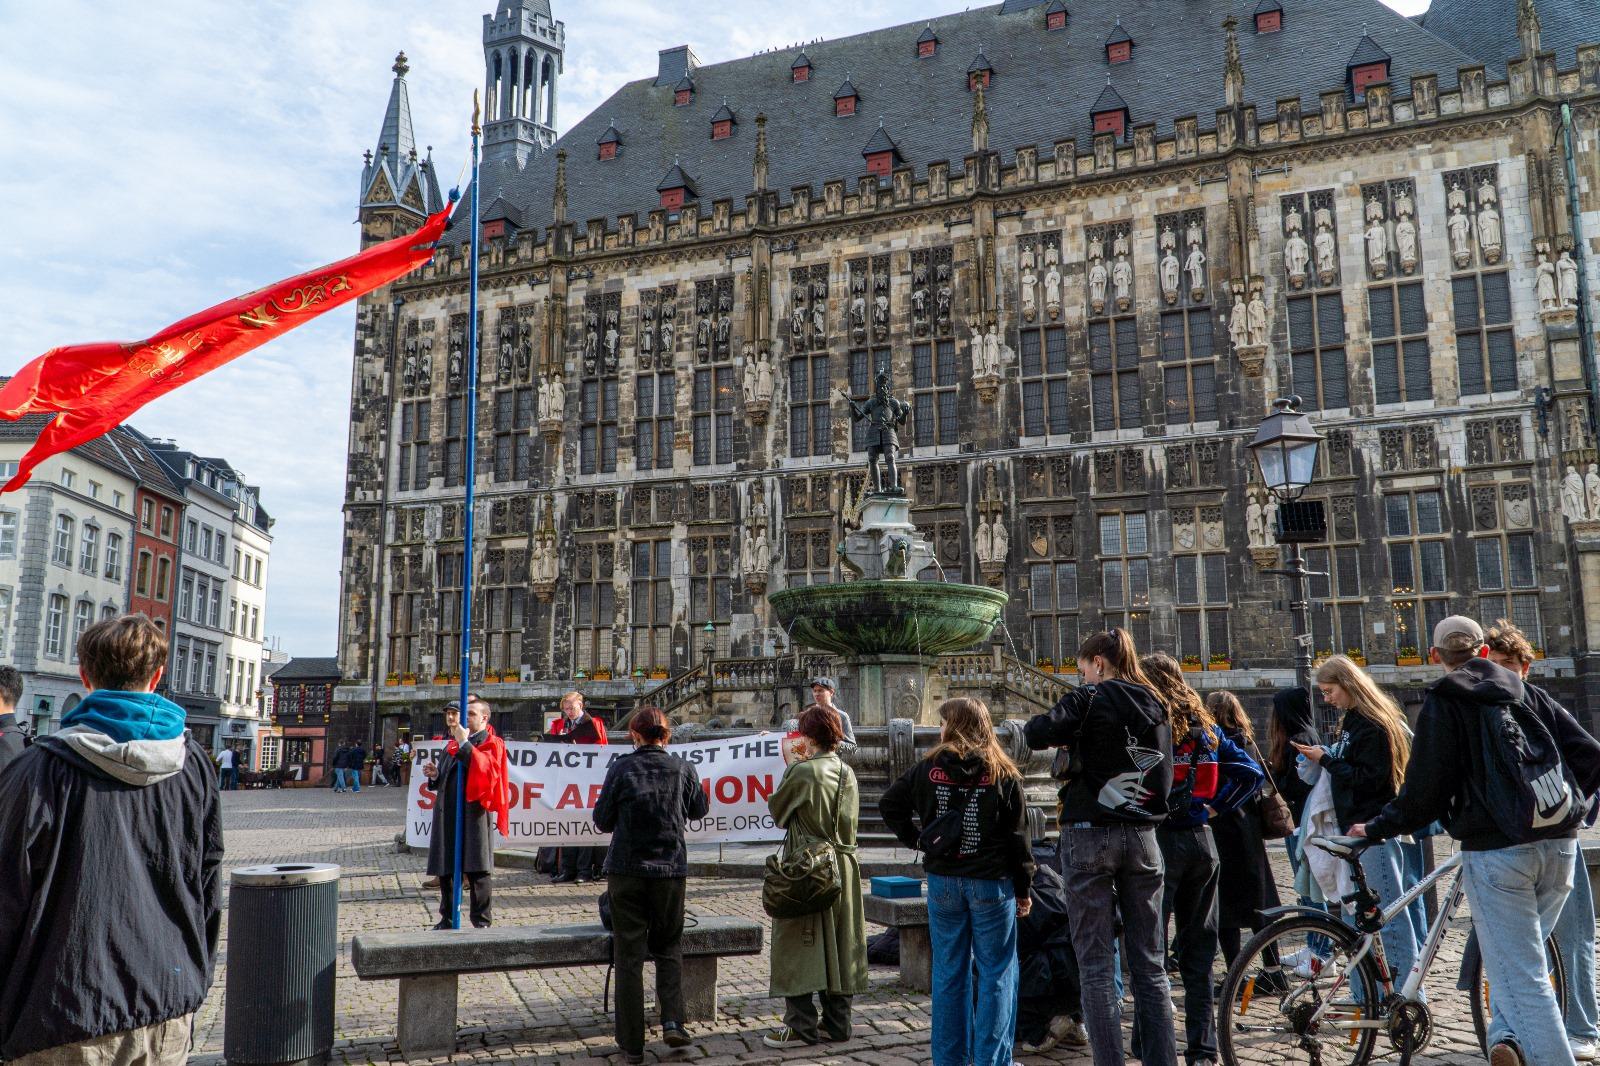 Liberals Fail to respond to Campaign against Abortion in Aachen, Germany